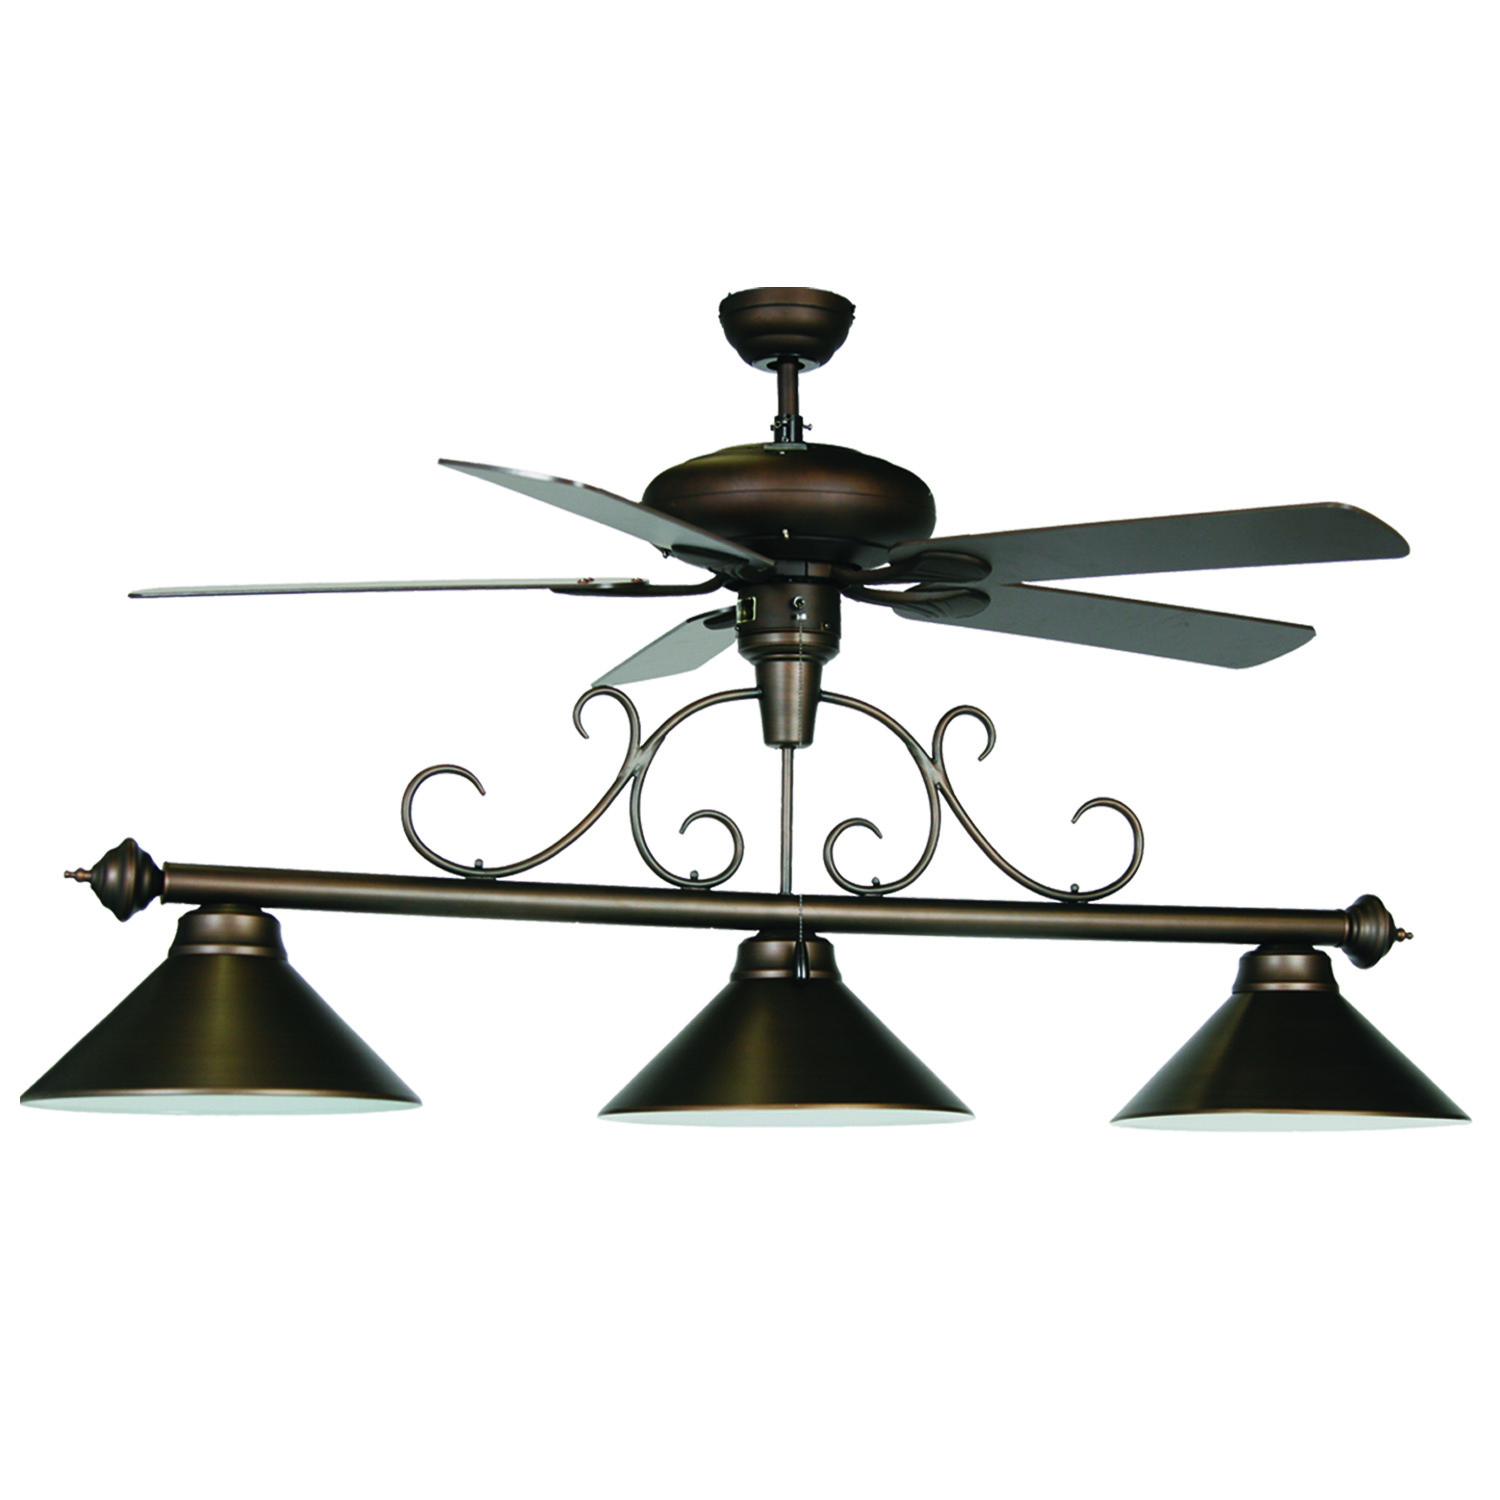 Ceiling Fan Pool Table Light, Antique Pool Table Lamp